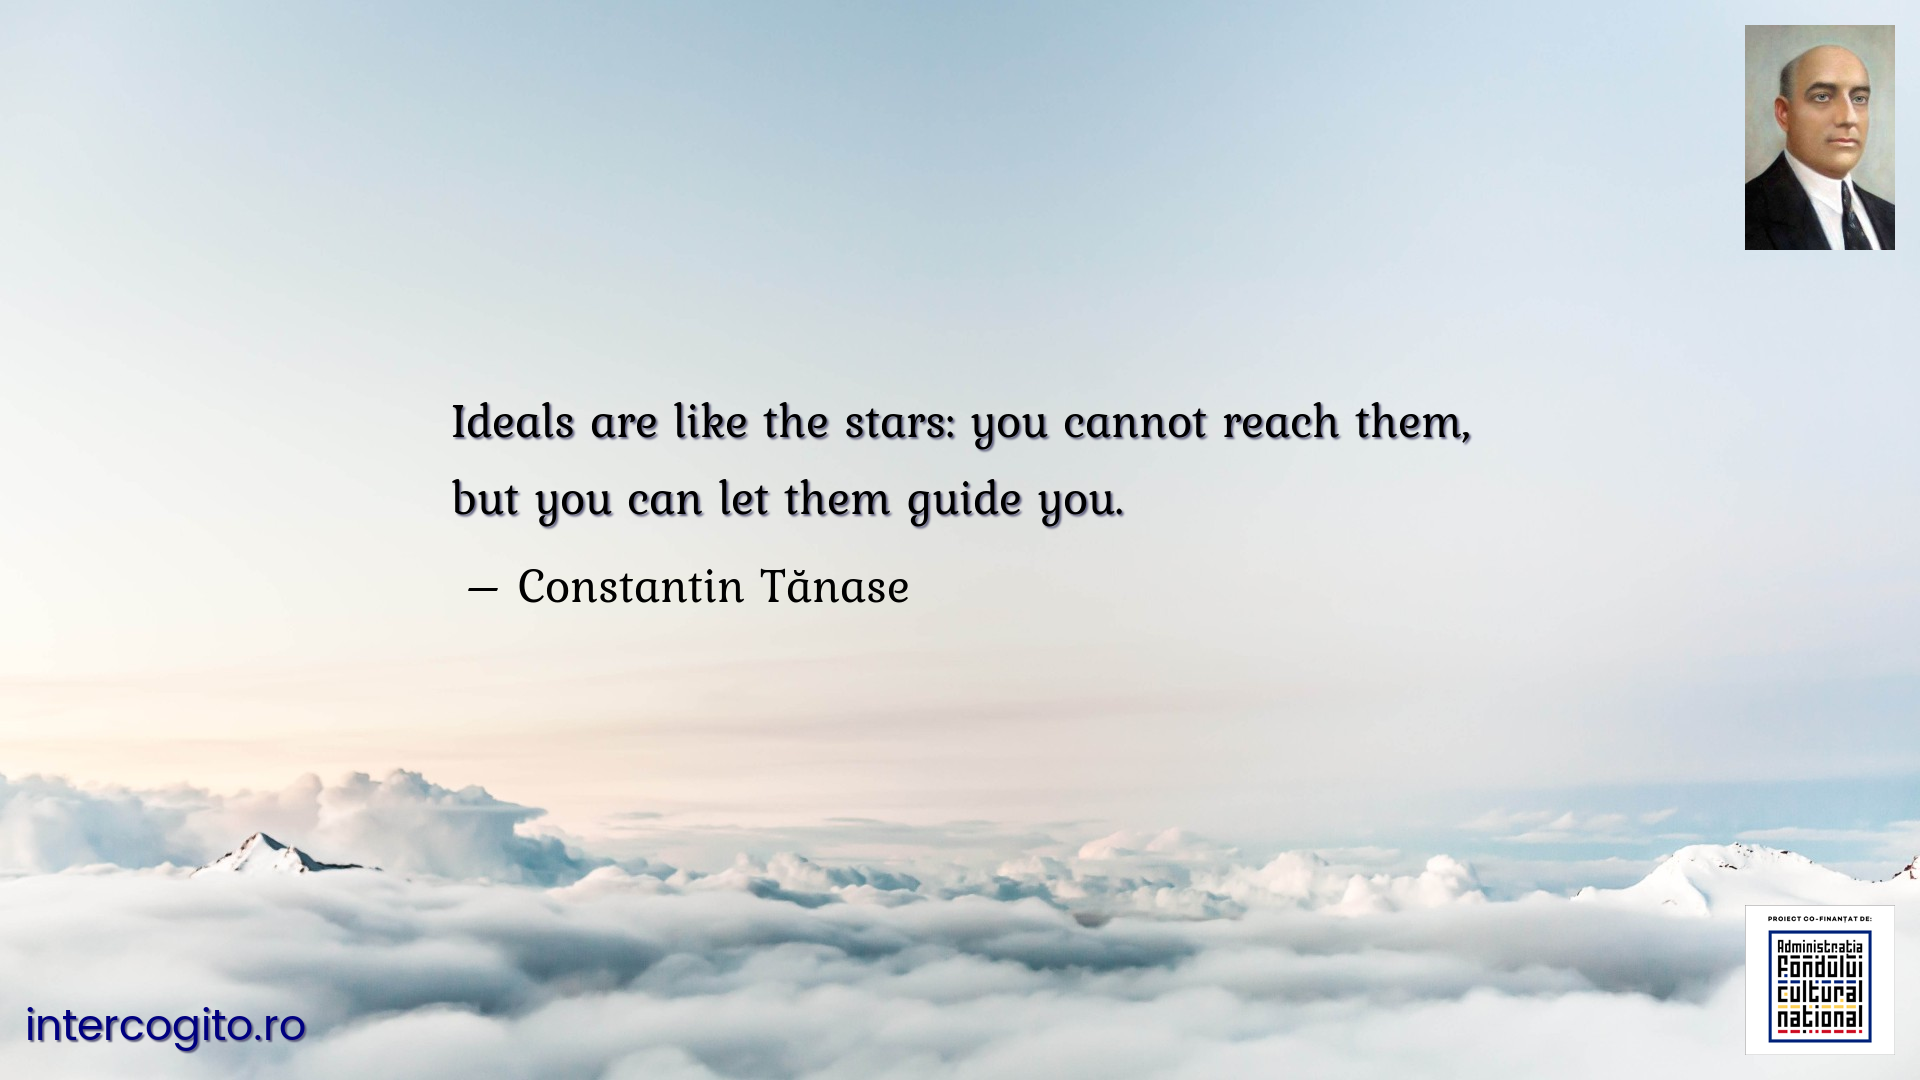 Ideals are like the stars: you cannot reach them, but you can let them guide you.